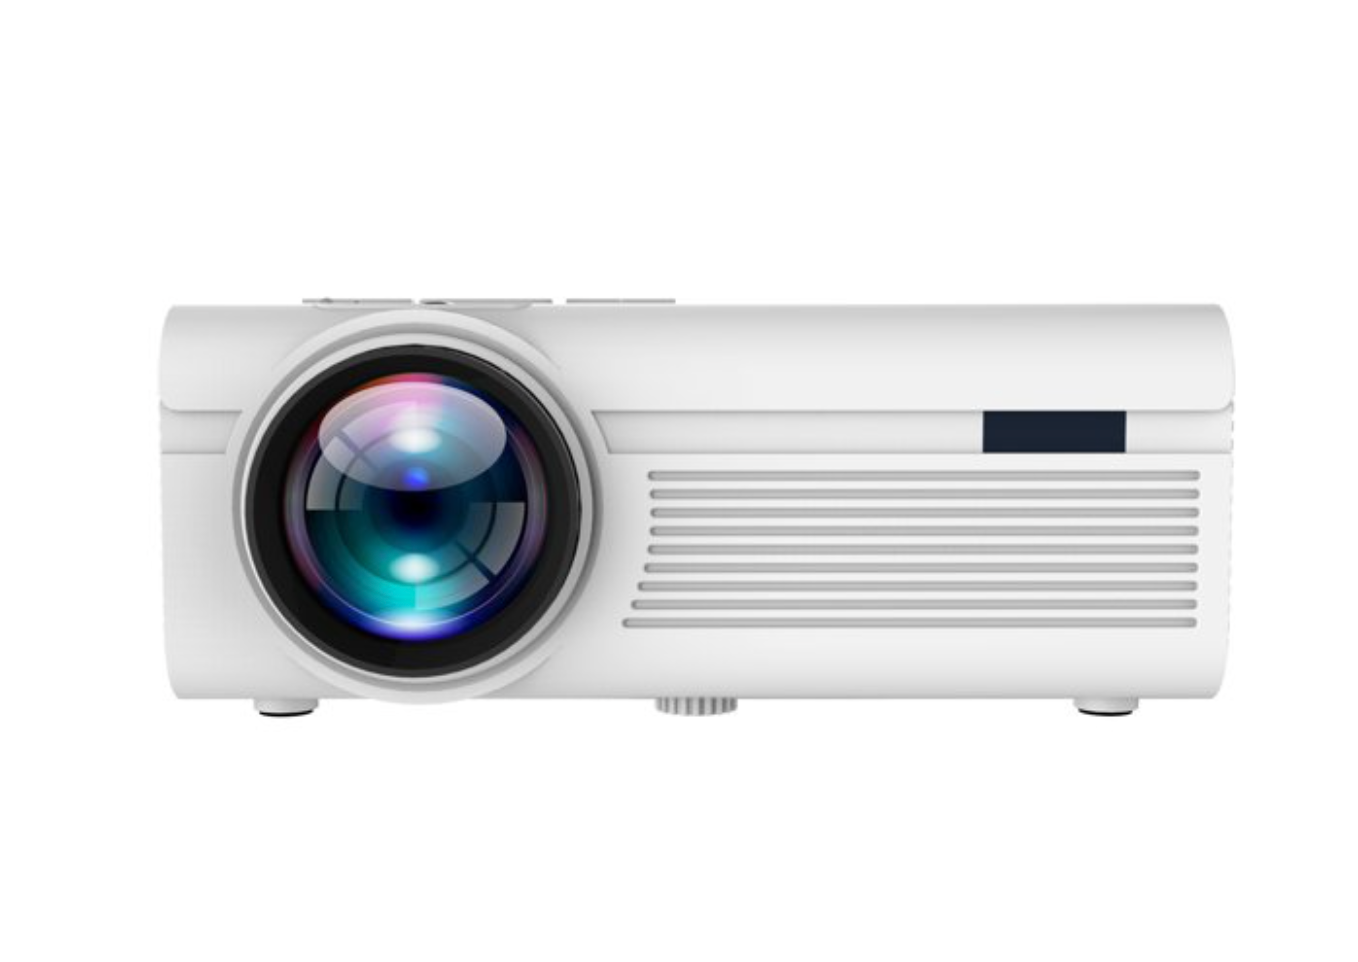 RCA RPJ060 Projector 150 Portable 1080p LED/LCD | Rechargeable Battery |  Built-in Handles and Speaker - Black/Gray